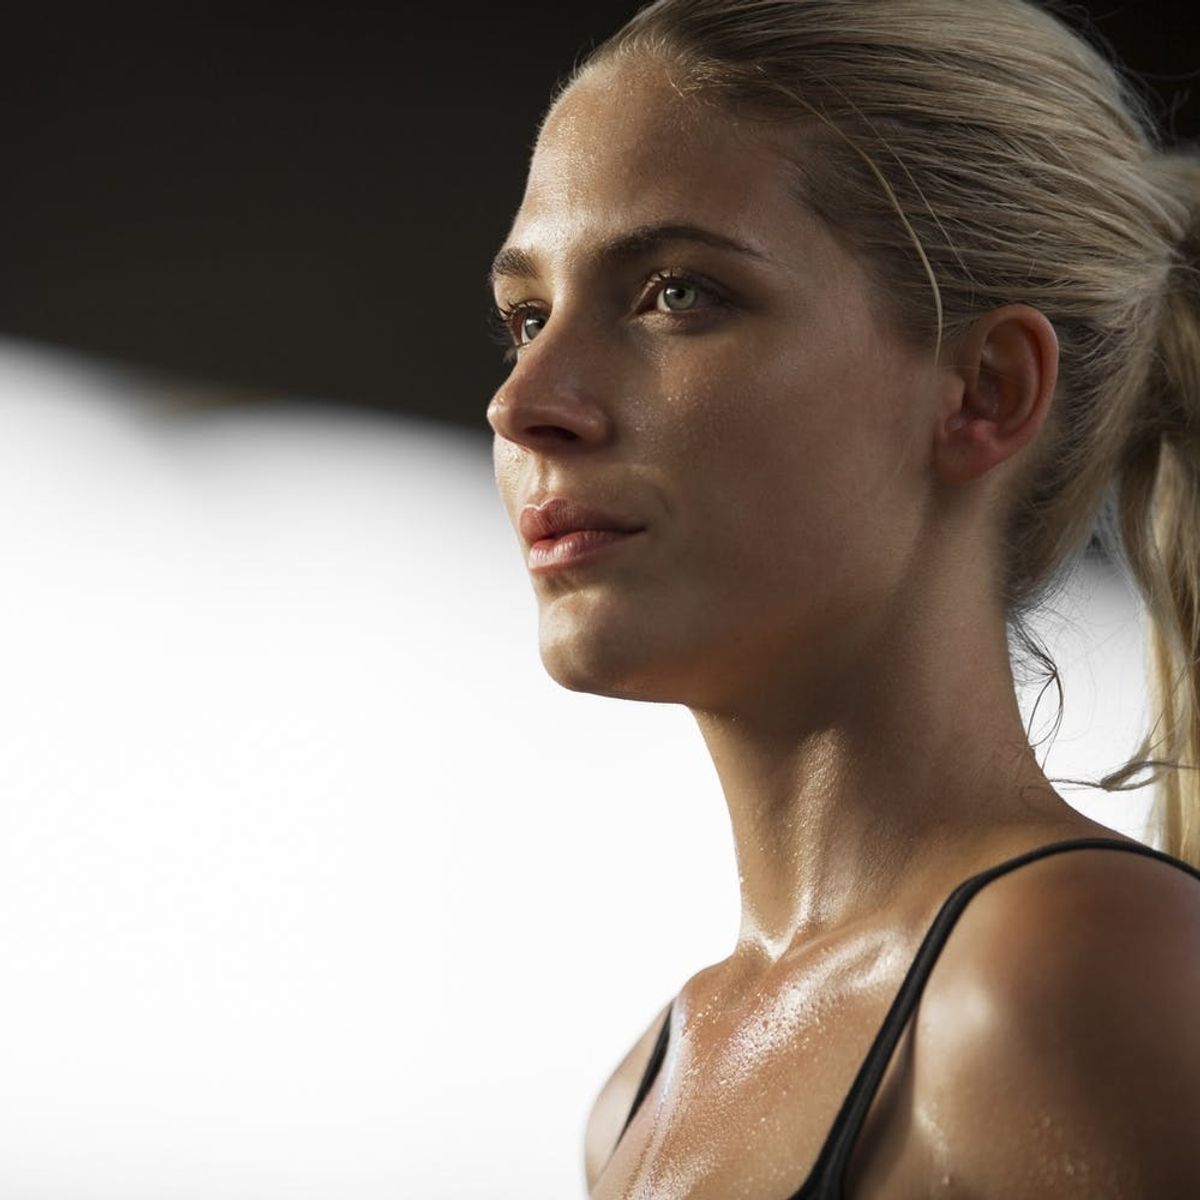 6 Weird Workout Symptoms That Are Completely Normal